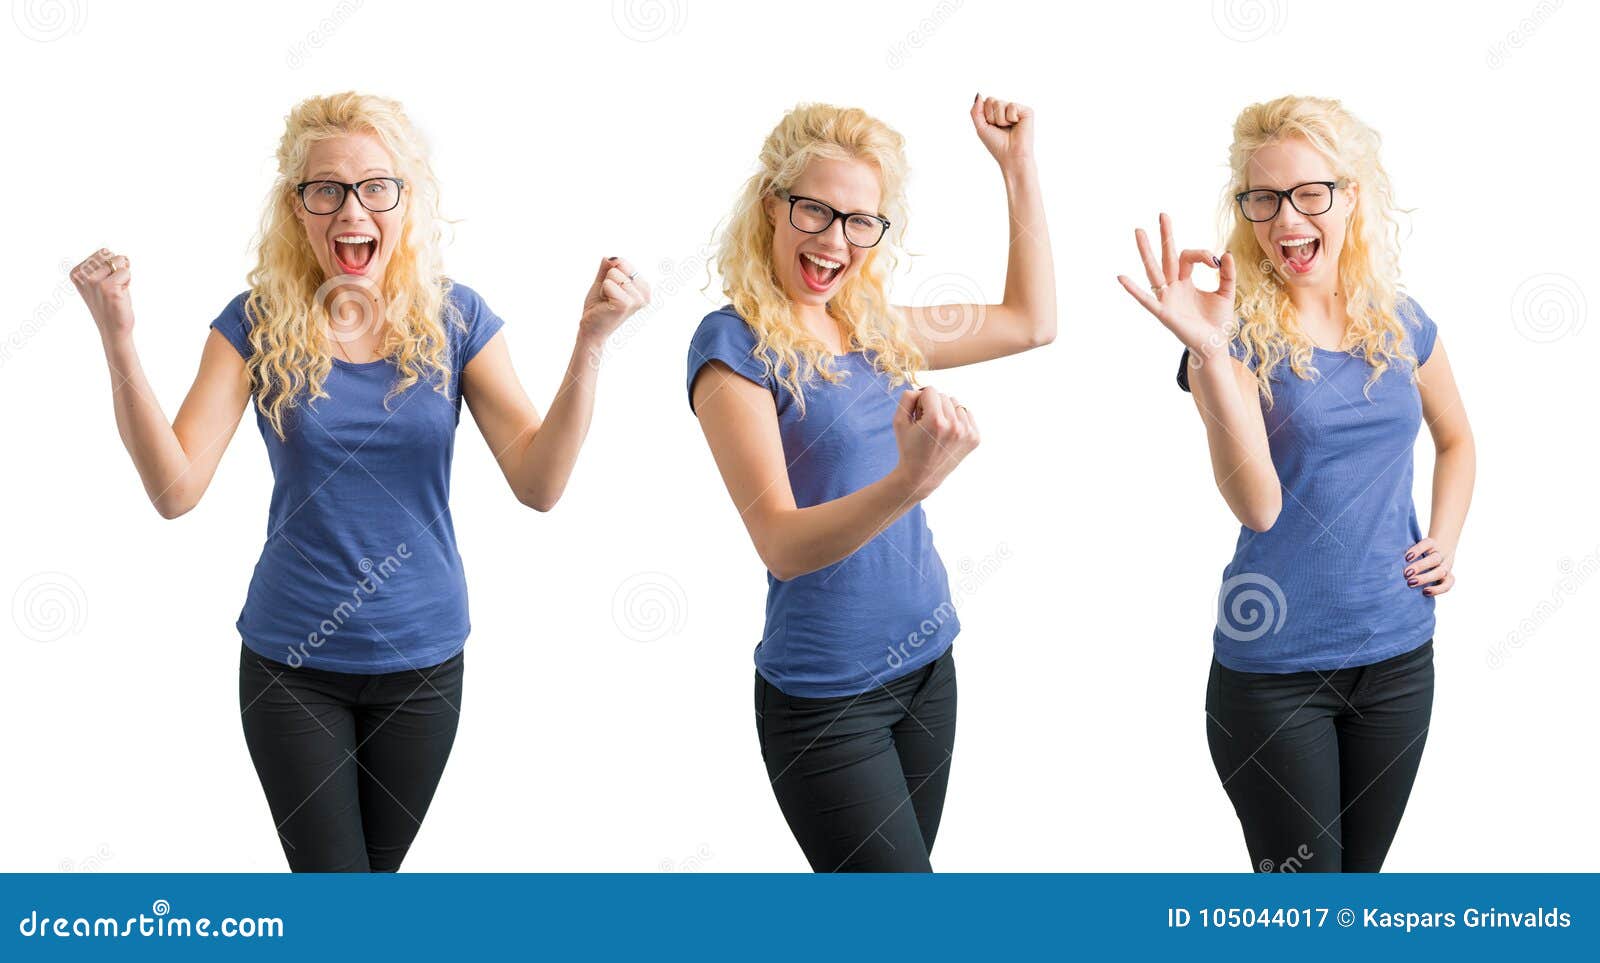 woman celebrating her succes in 3 different ways